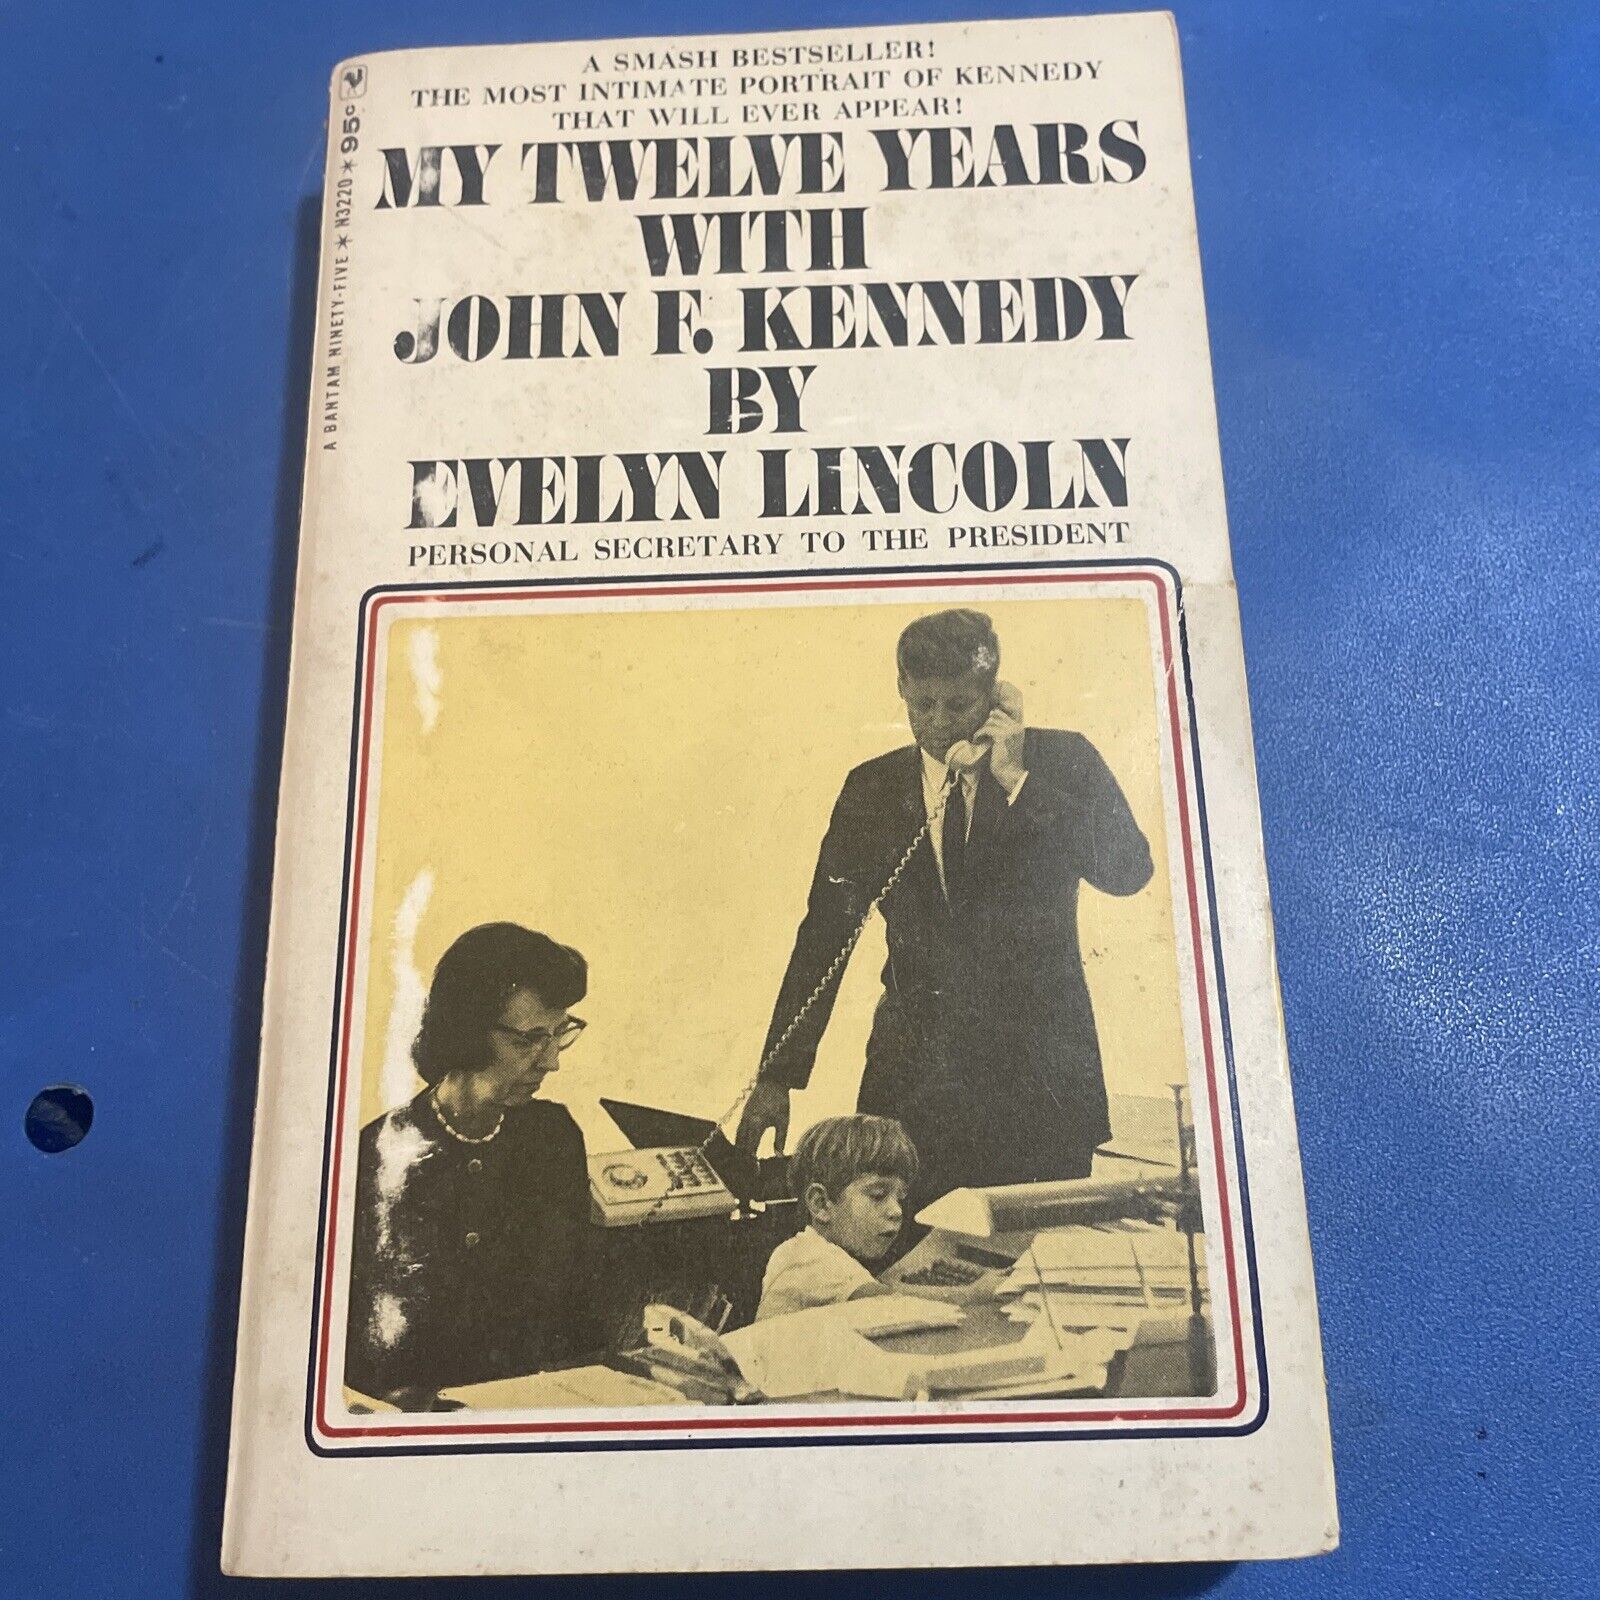 John F Kennedy Book: My Twelve Years by: Evelyn Lincoln